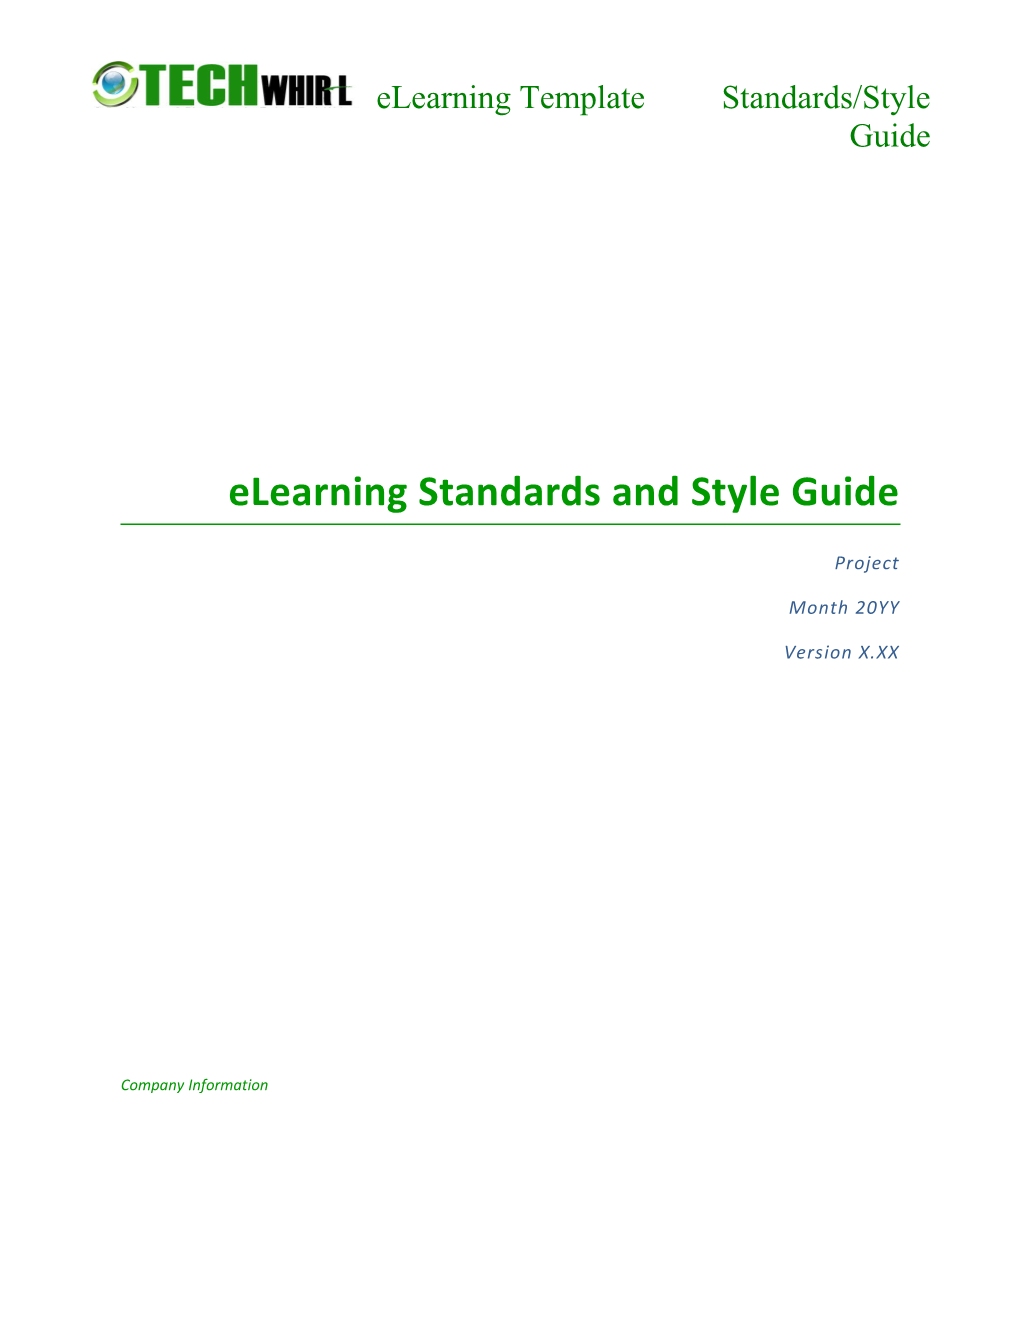 Elearningstandards and Style Guide